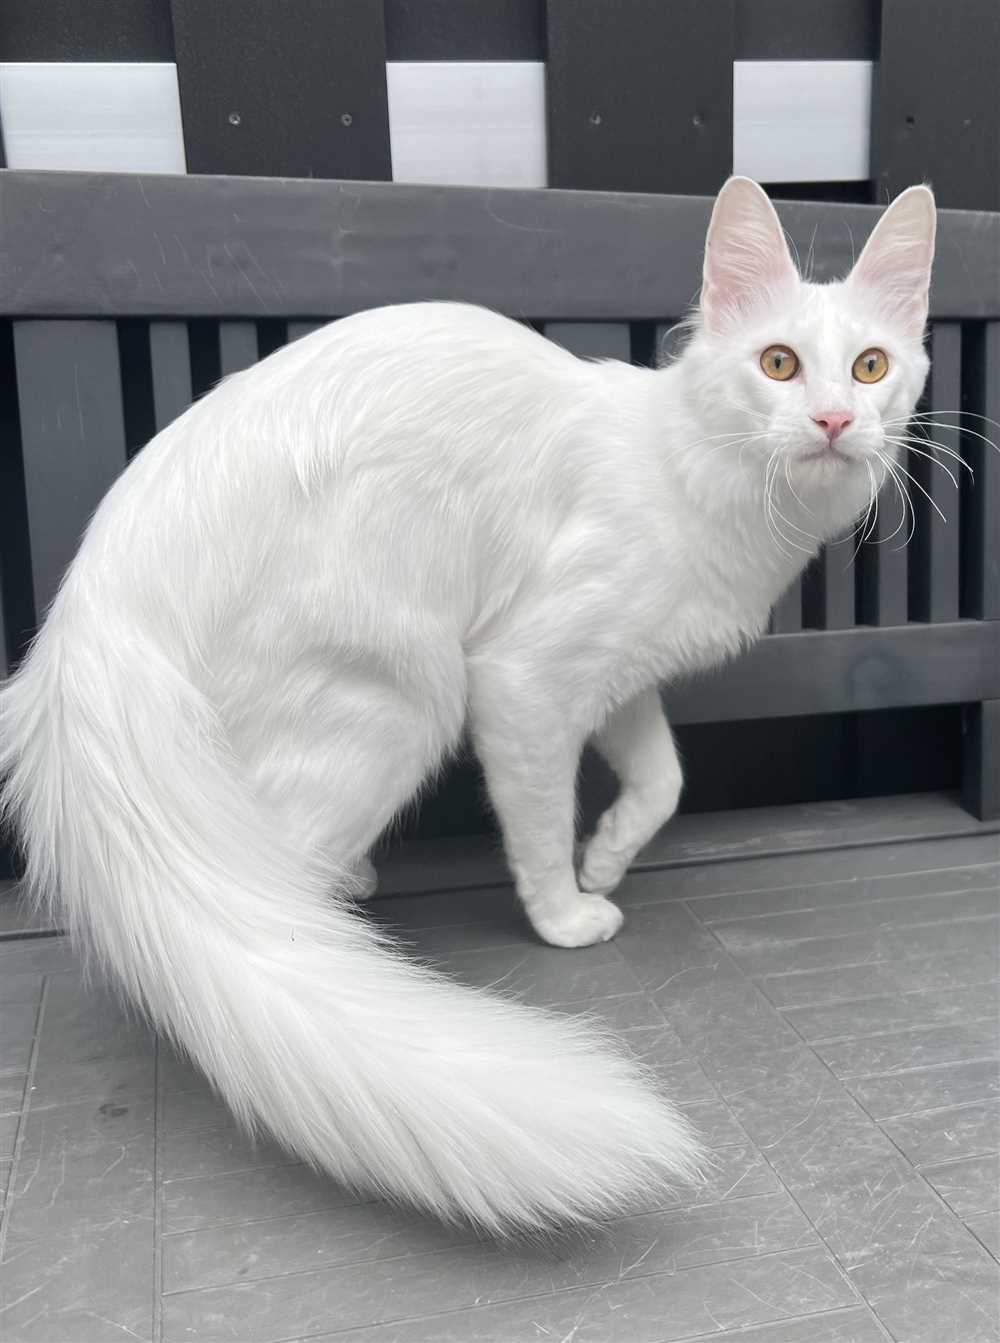 The Turkish Angora: A Sophisticated and Classy Breed of Cat